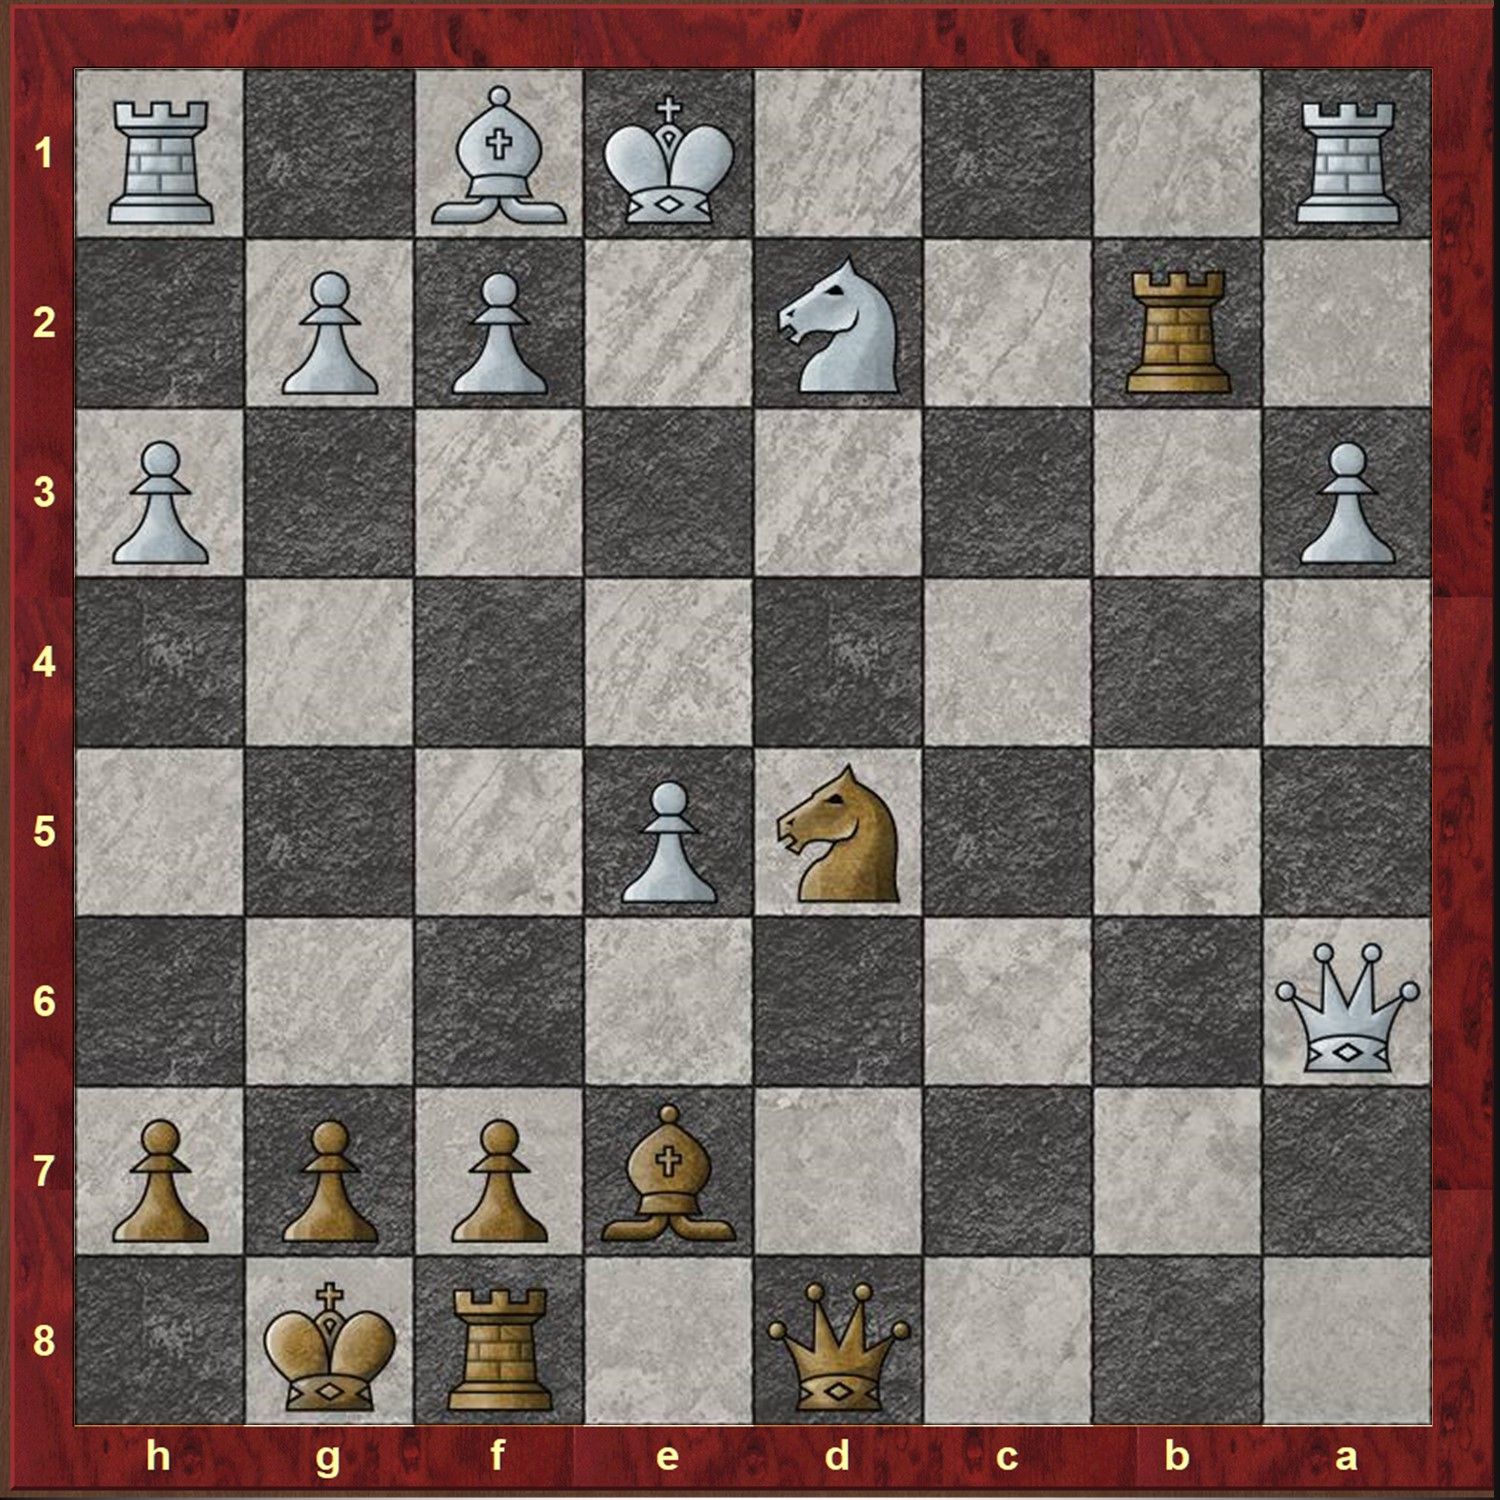 Next move for white? - Chess Forums 